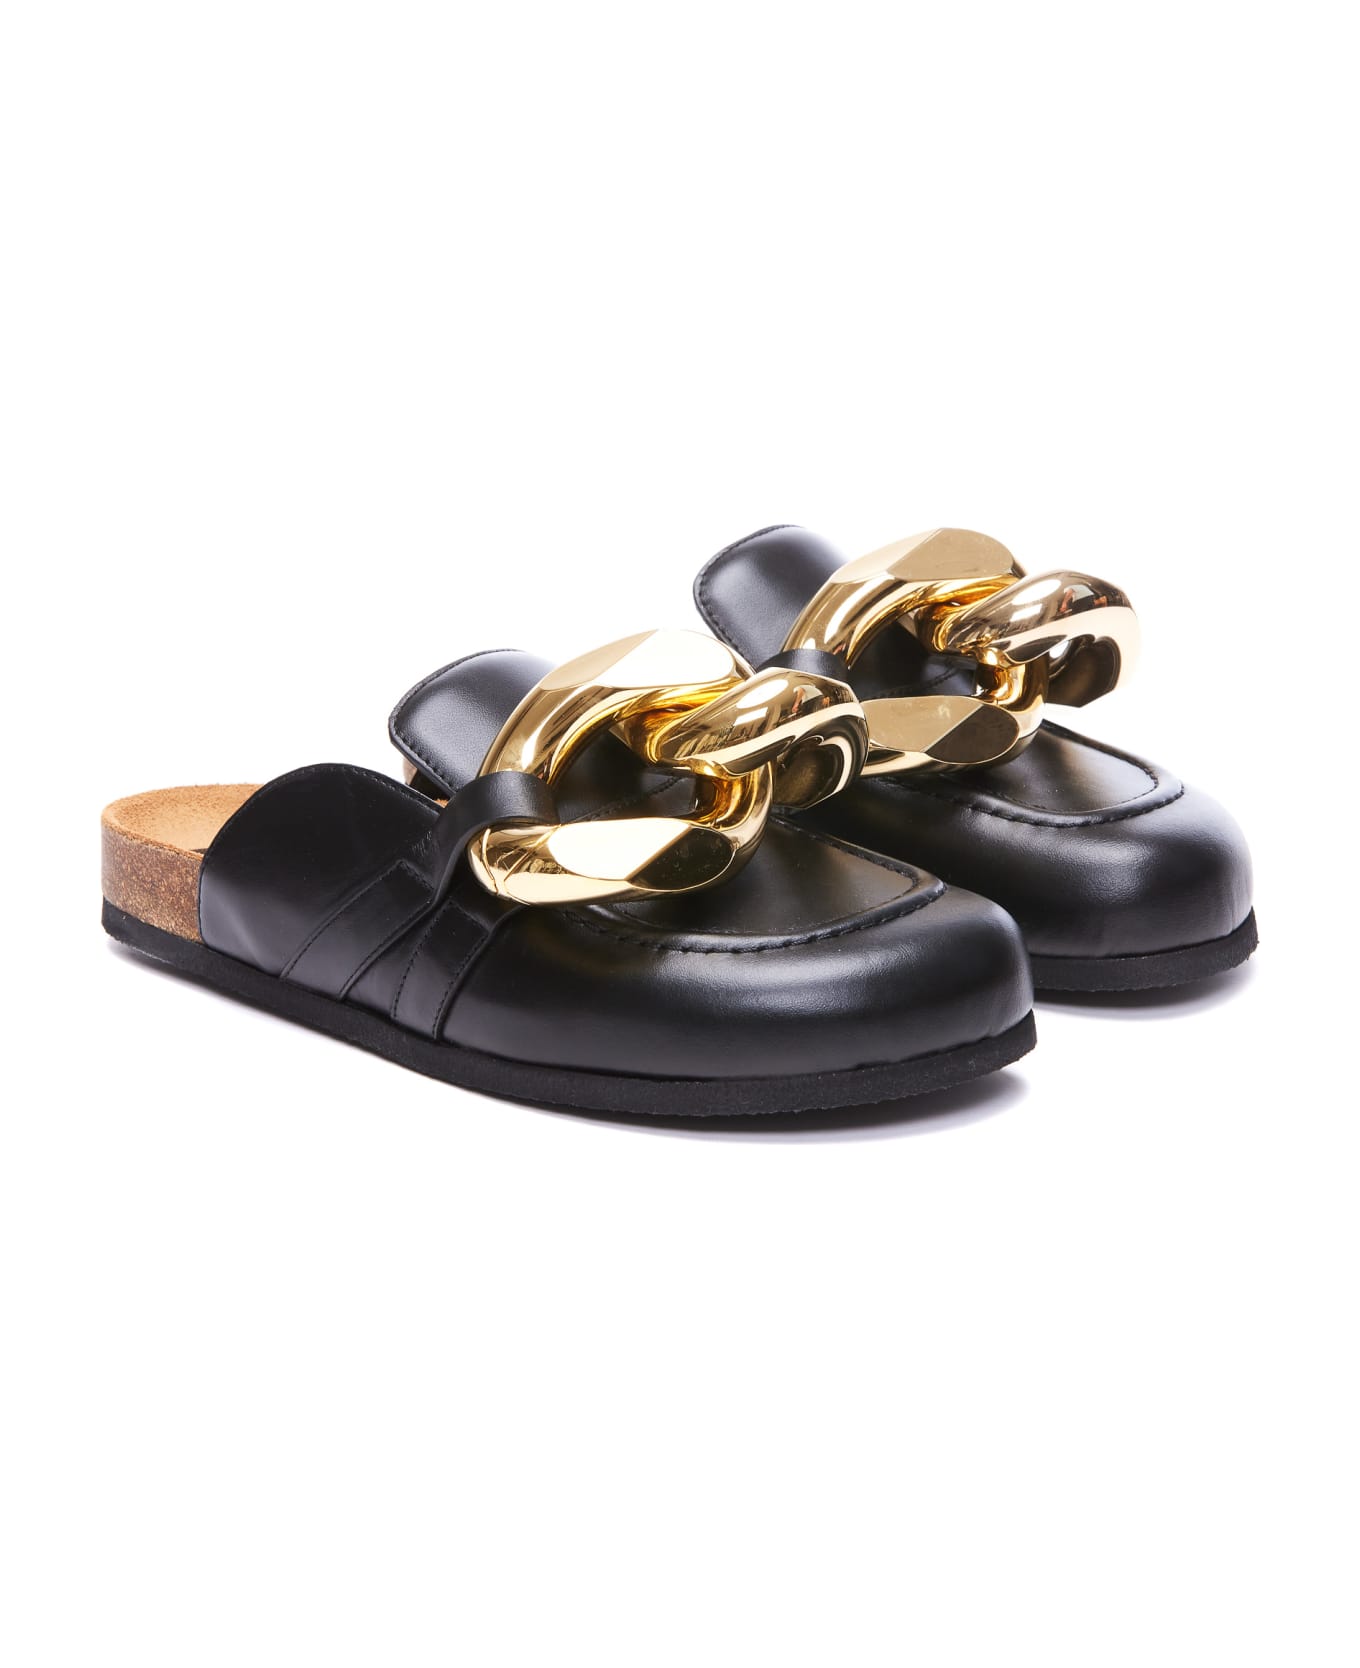 J.W. Anderson Chain Loafers - Black サンダル